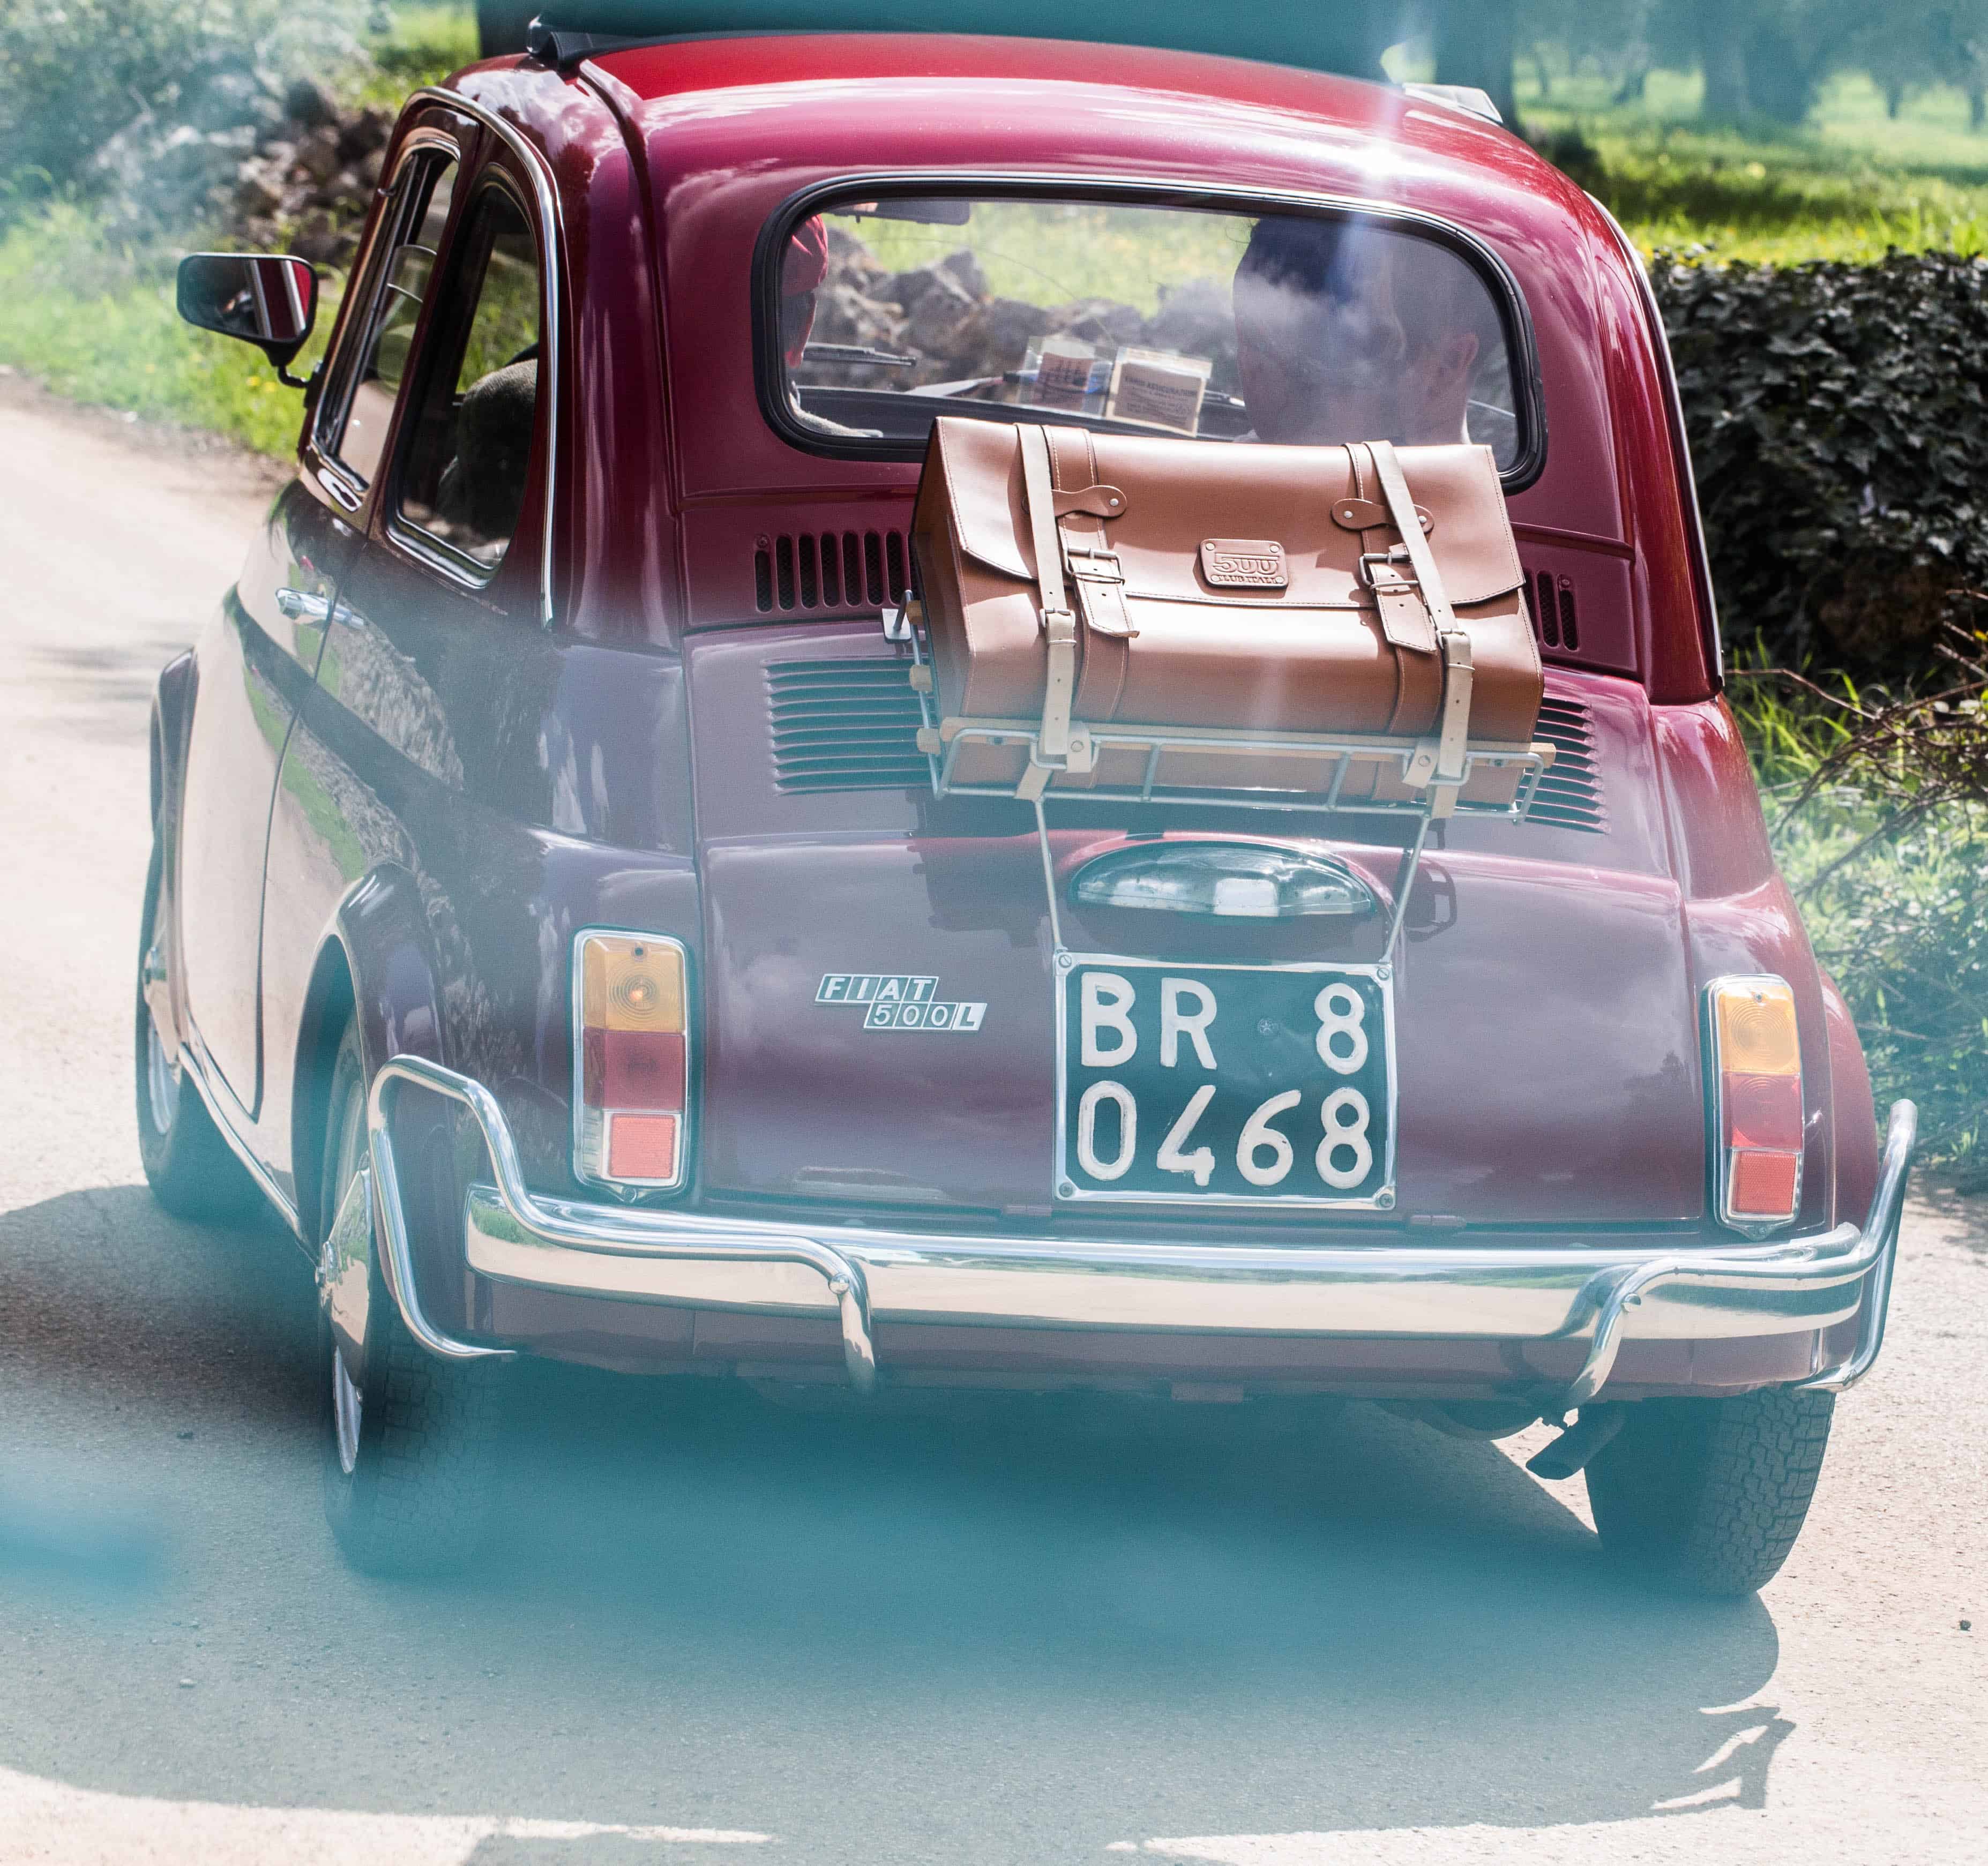 Fiat 500 on country road